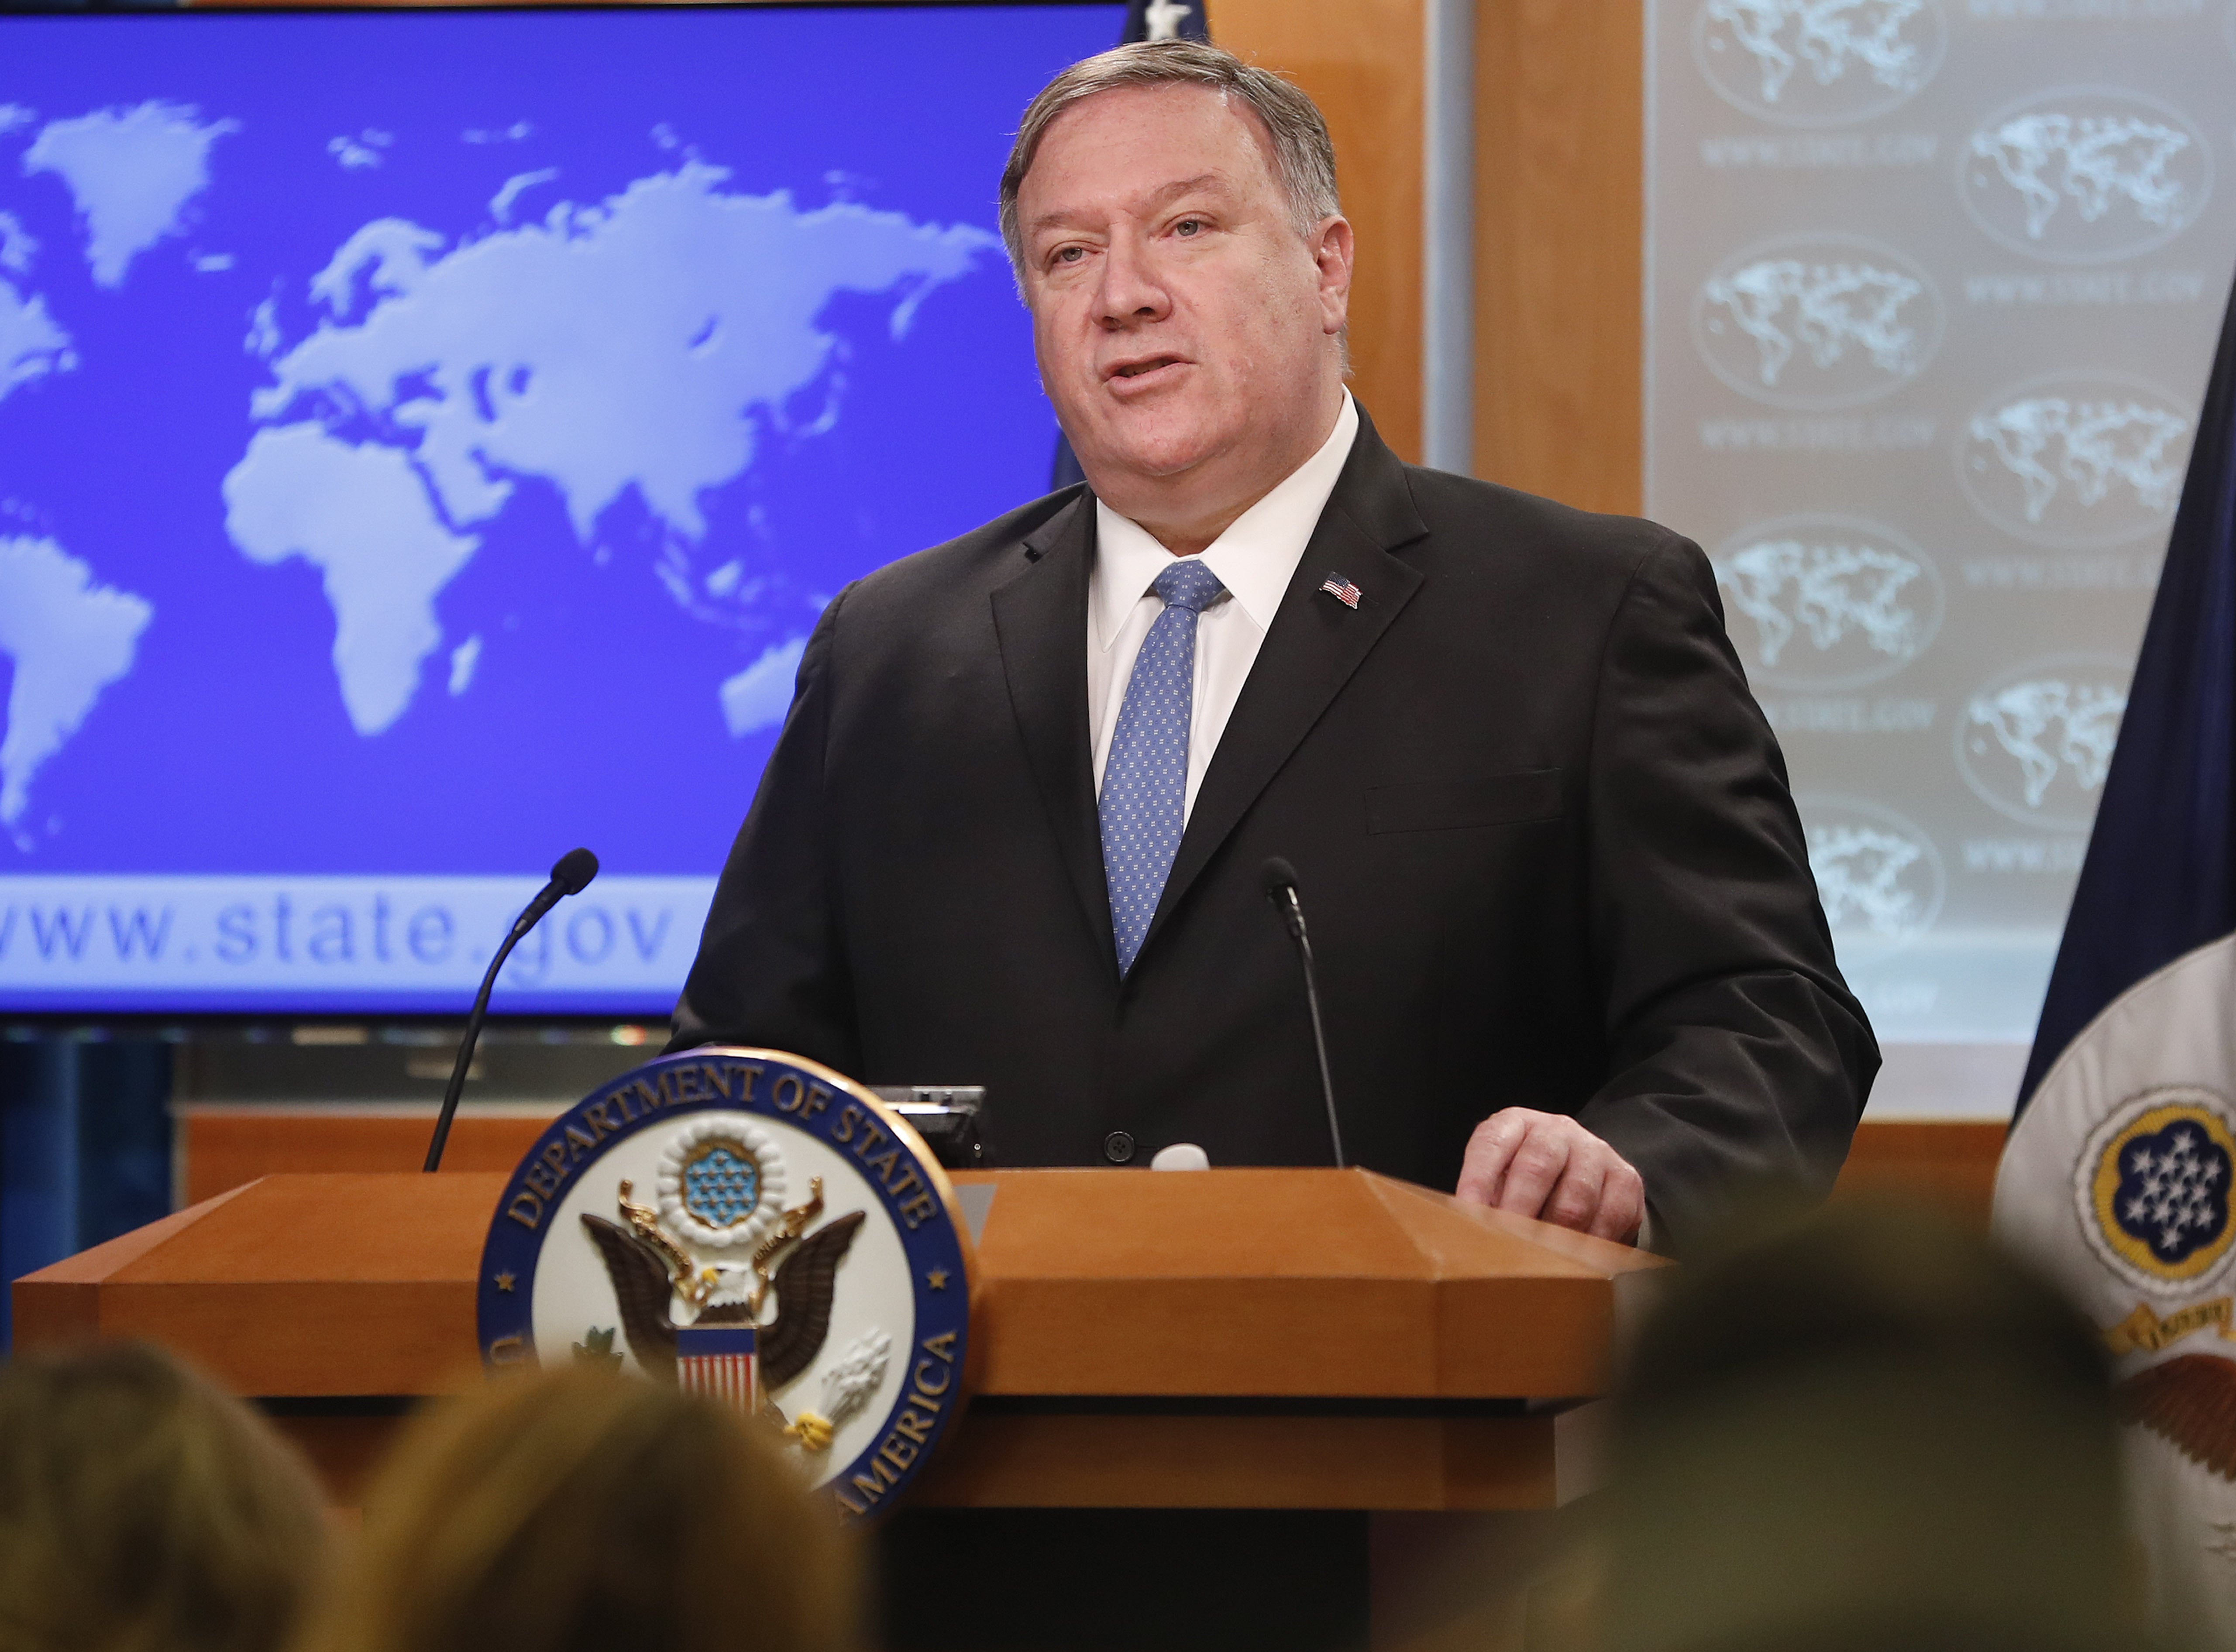 Secretary of State Mike Pompeo speaks during a news conference at the State Department in Washington, Wednesday, April 17, 2019.